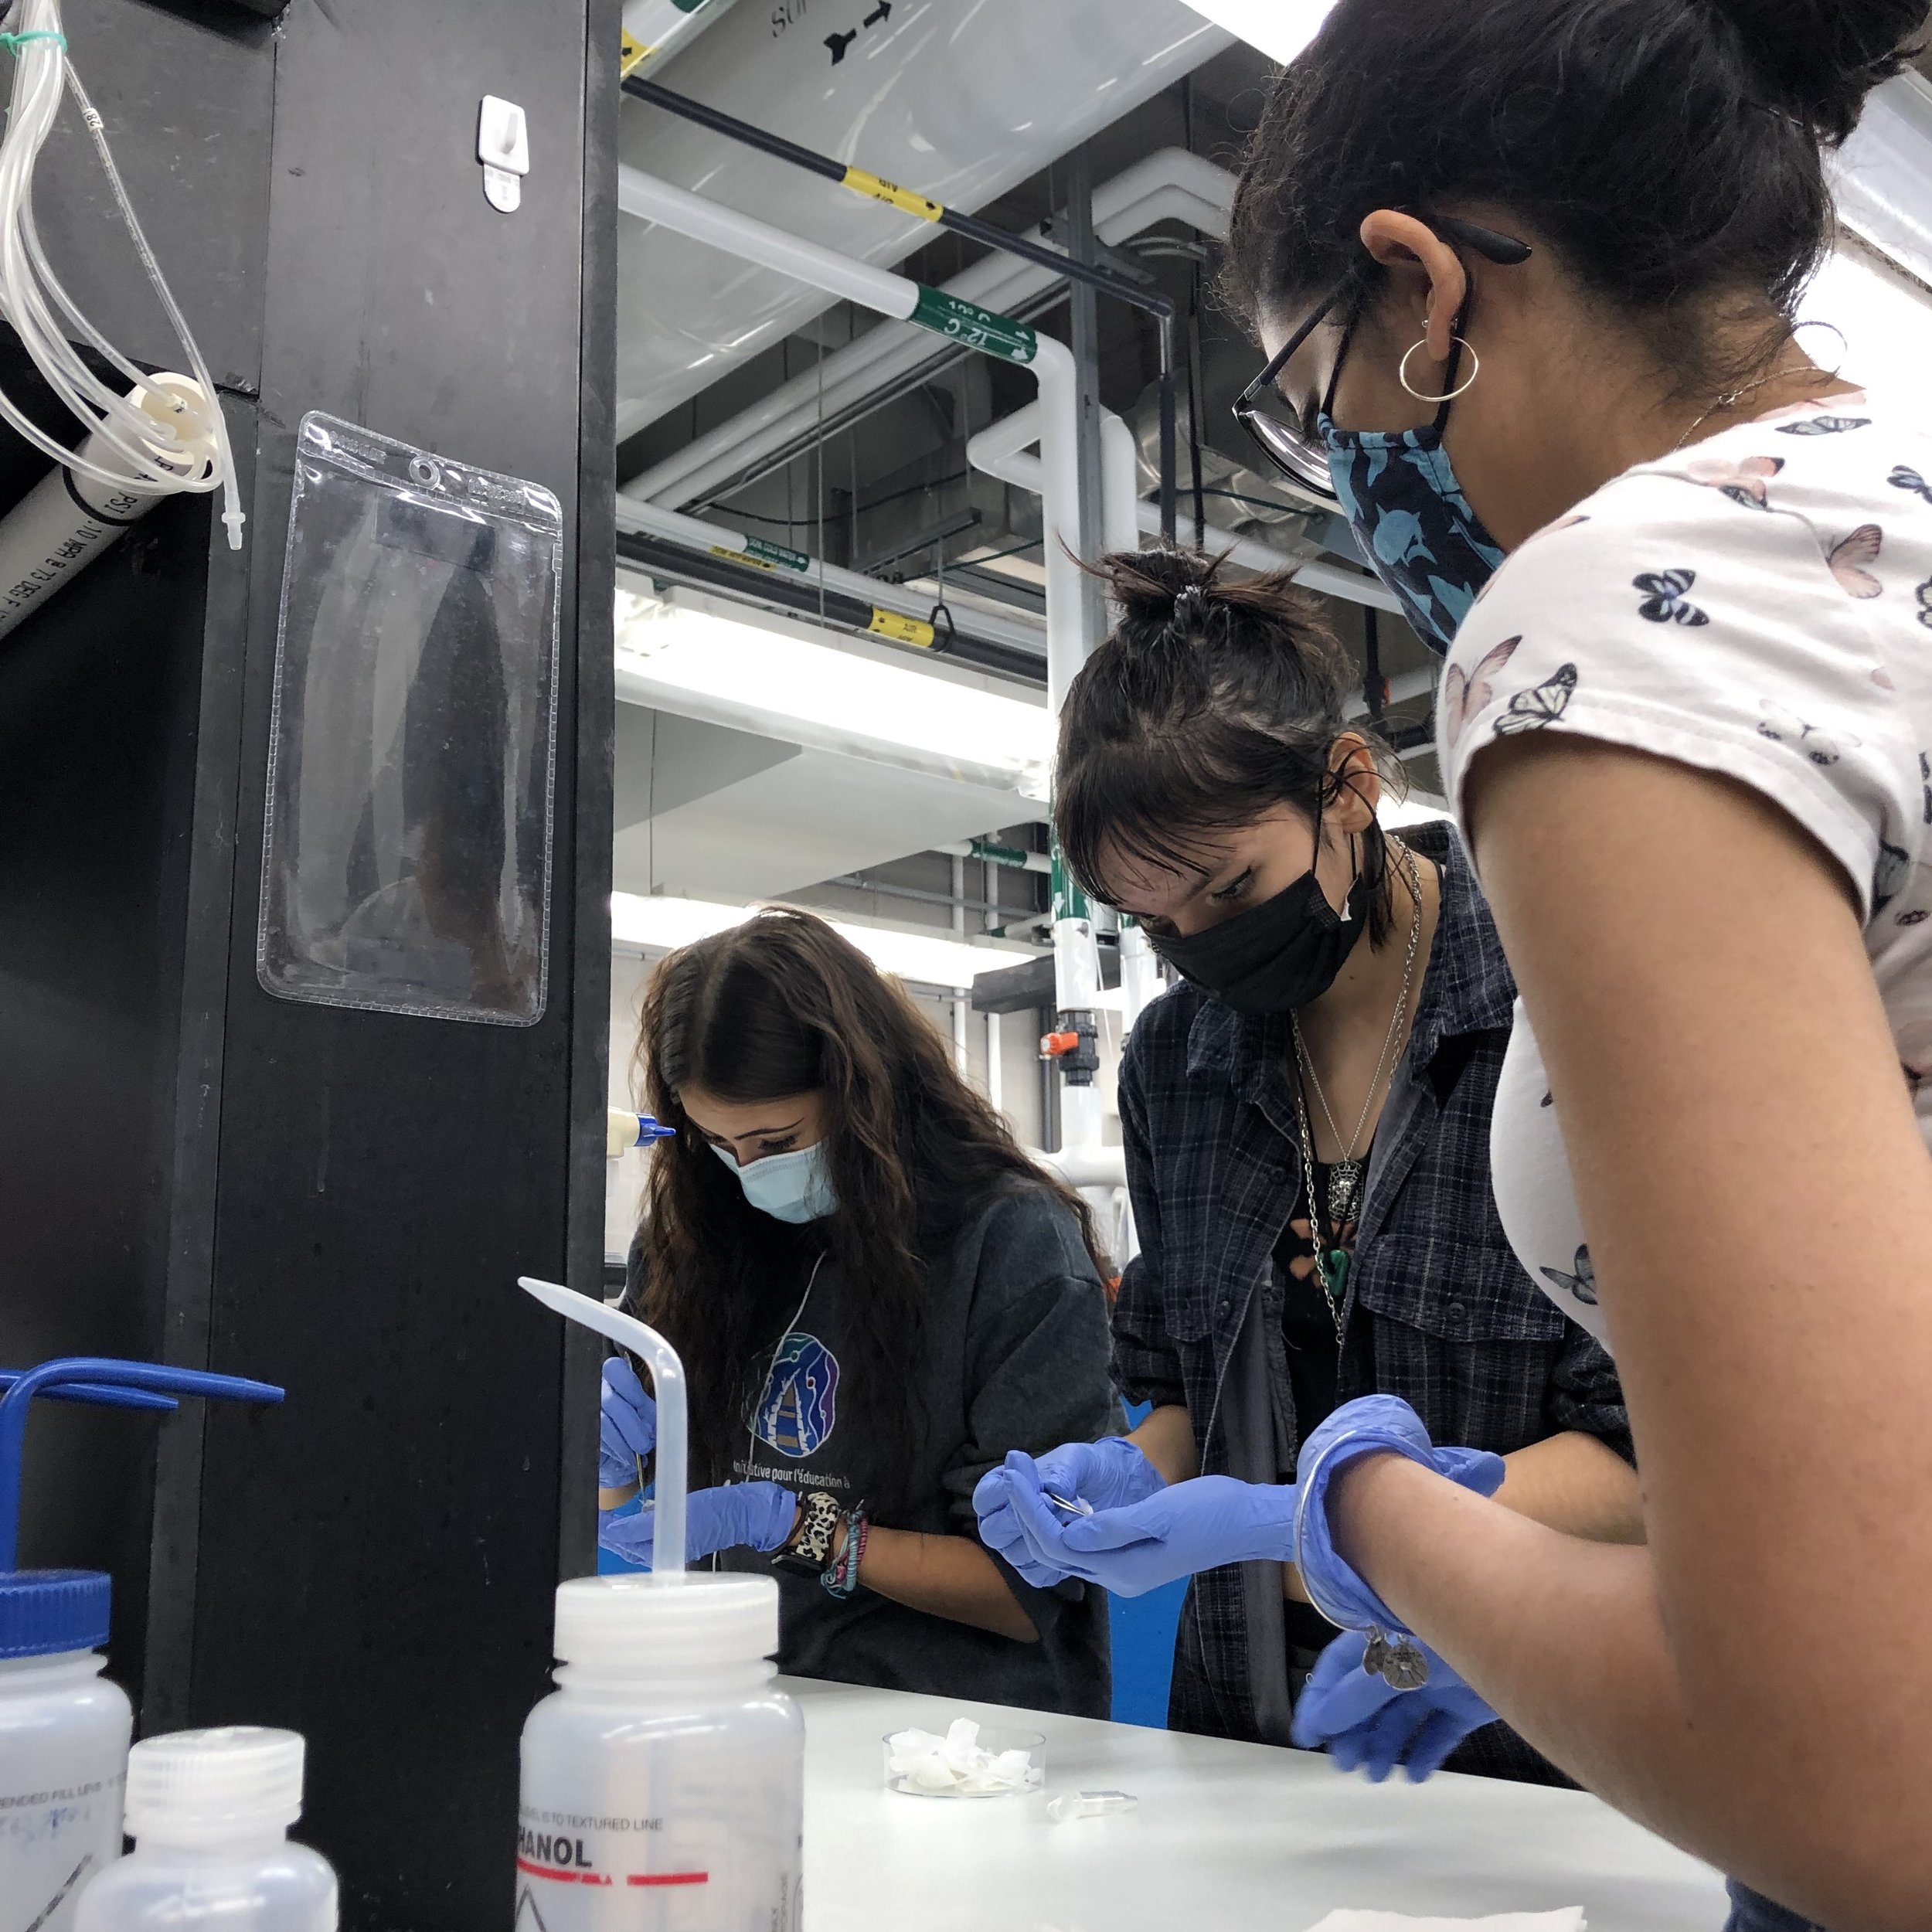 From embryo to adult fish, MCFN youth (Ocean Phillips (left),Kessa Chum (center)) got to explore fish and then learn to sample with the Aquatic Omics Lab at Ontario Tech University.